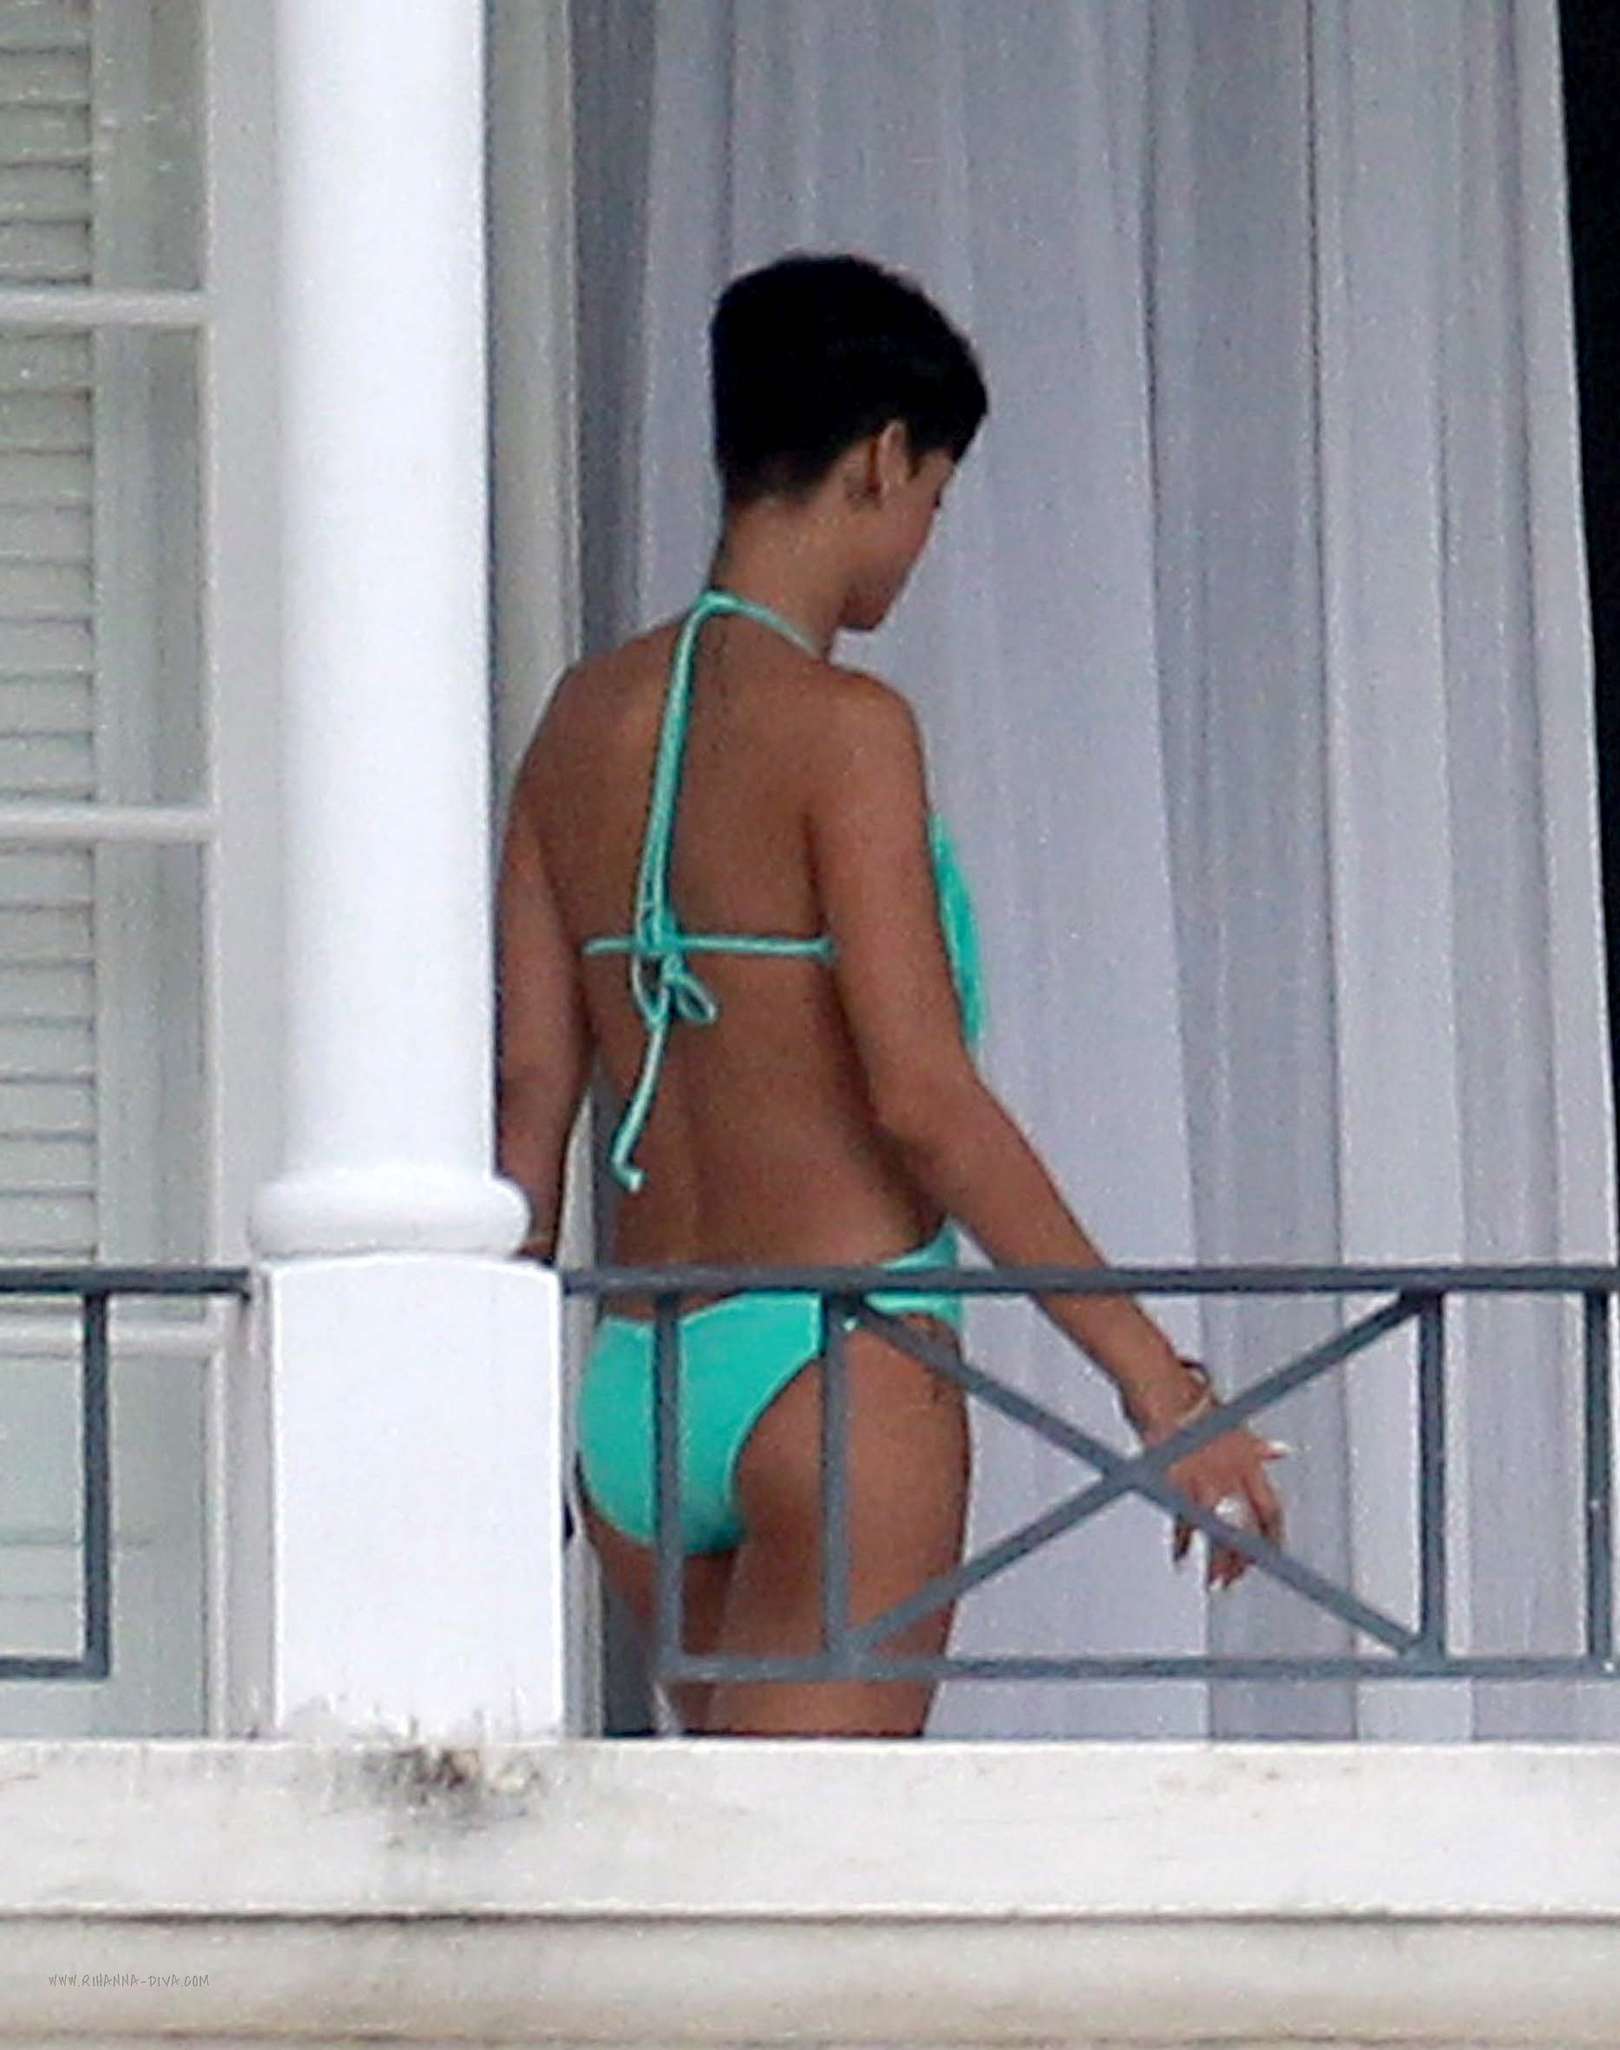 Rihanna - Wearing a swimsuit in Barbados